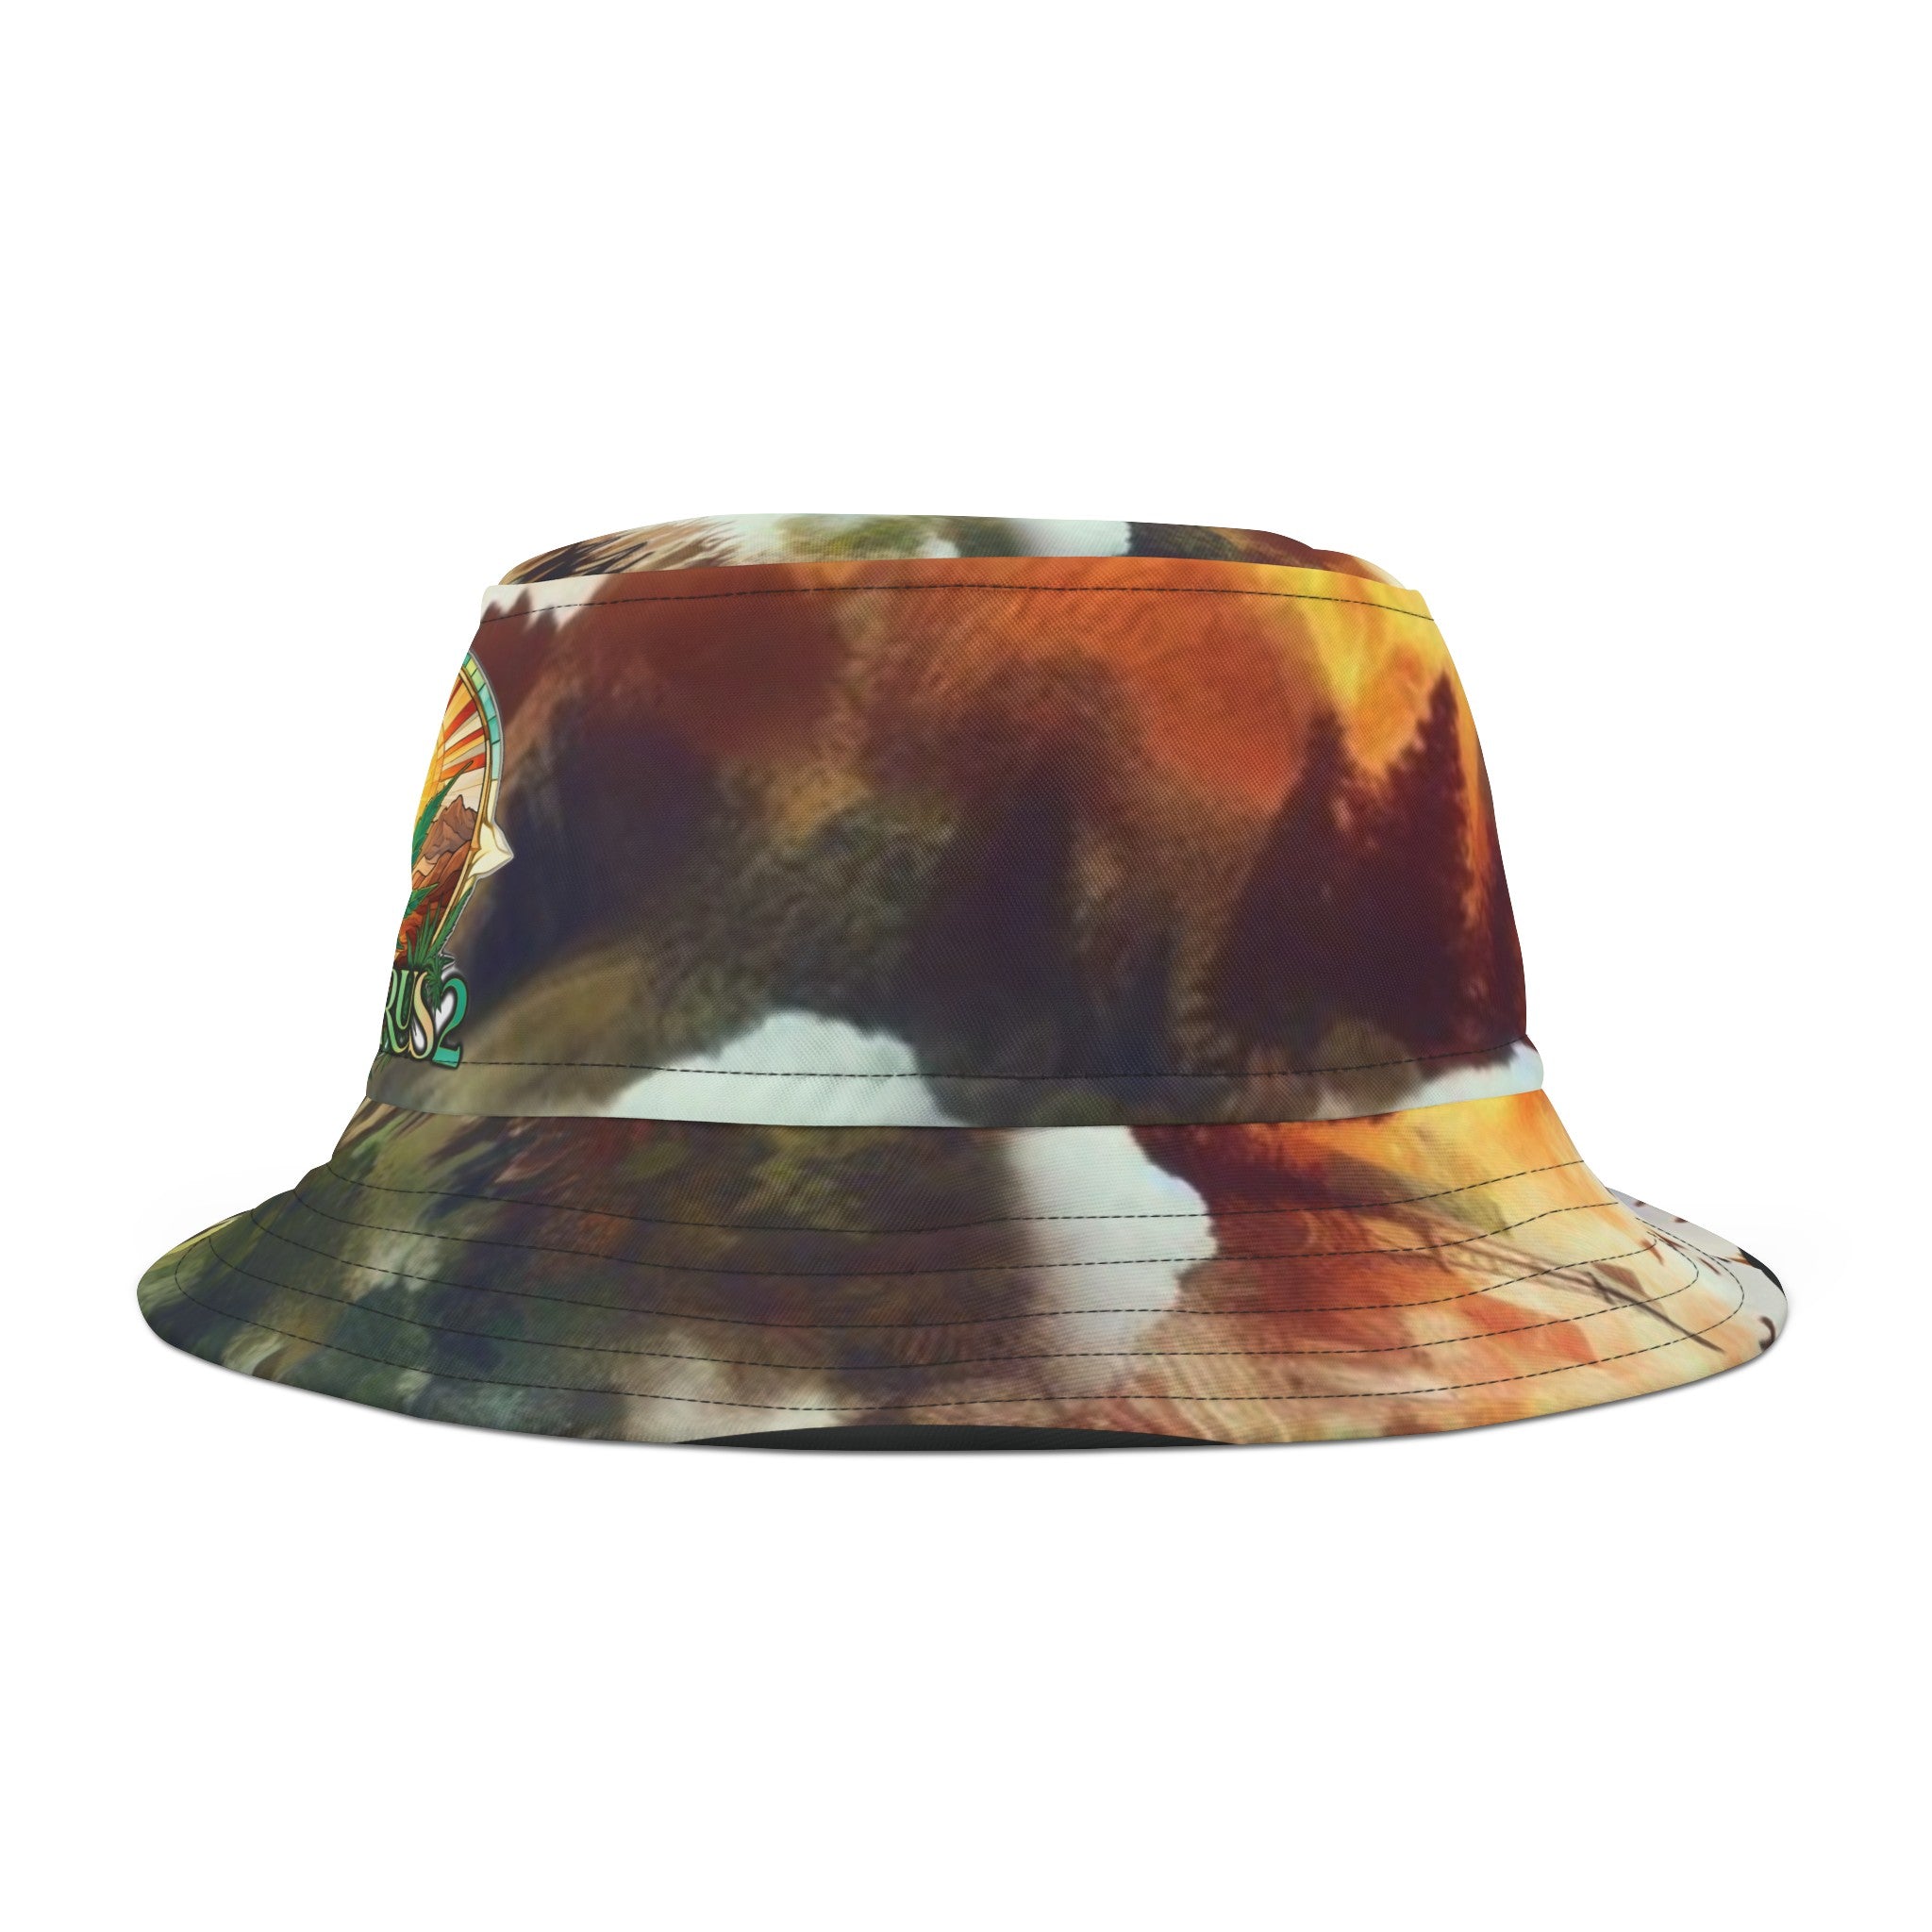 Treesrus2 Nature-Inspired Bucket Hat - Eco-Conscious Fashion for Outdoor Enthusiasts - TRU2 Clothing